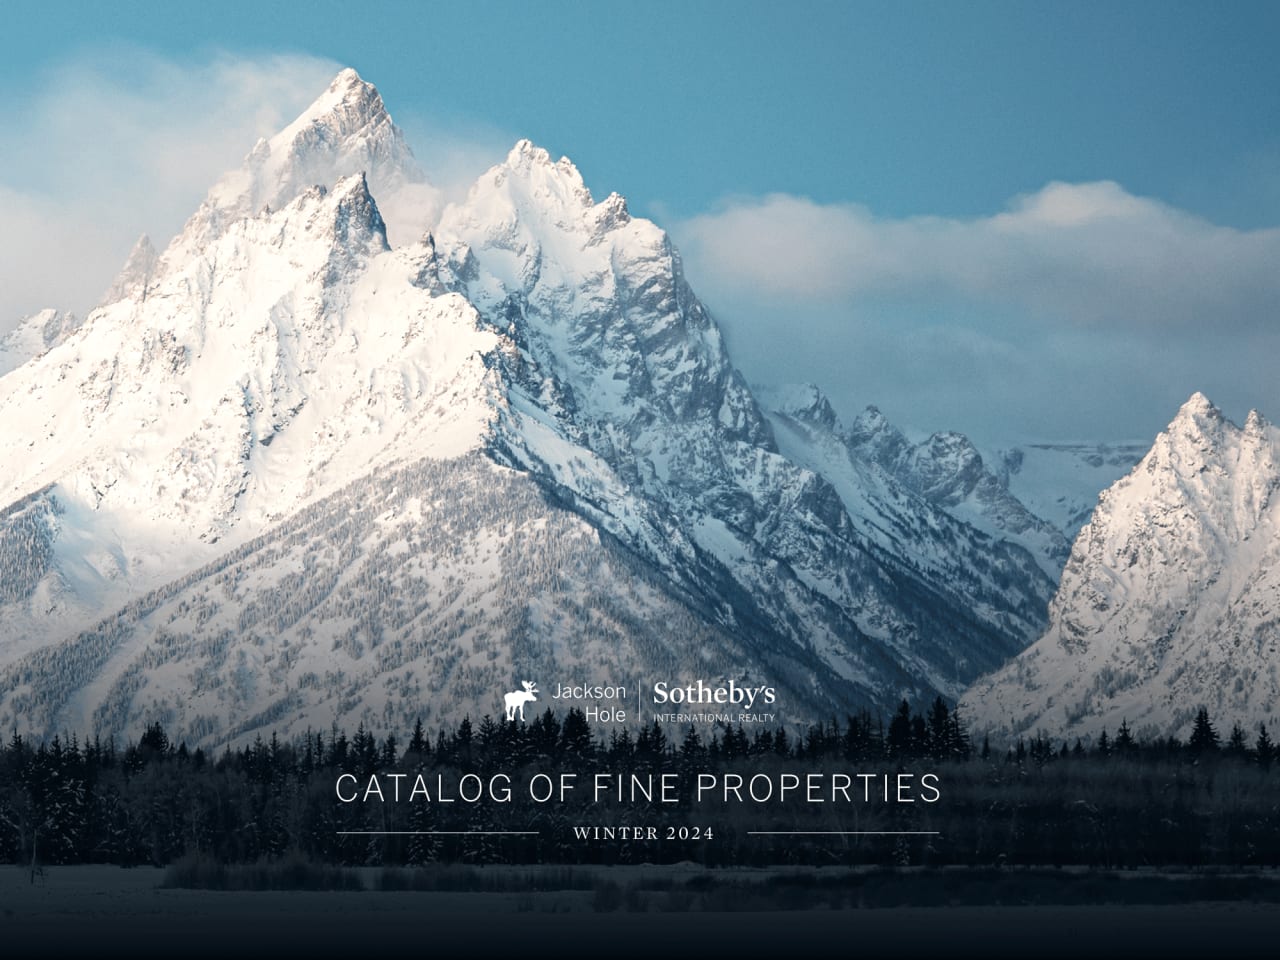 Introducing The 2024 Winter Catalog of Fine properties